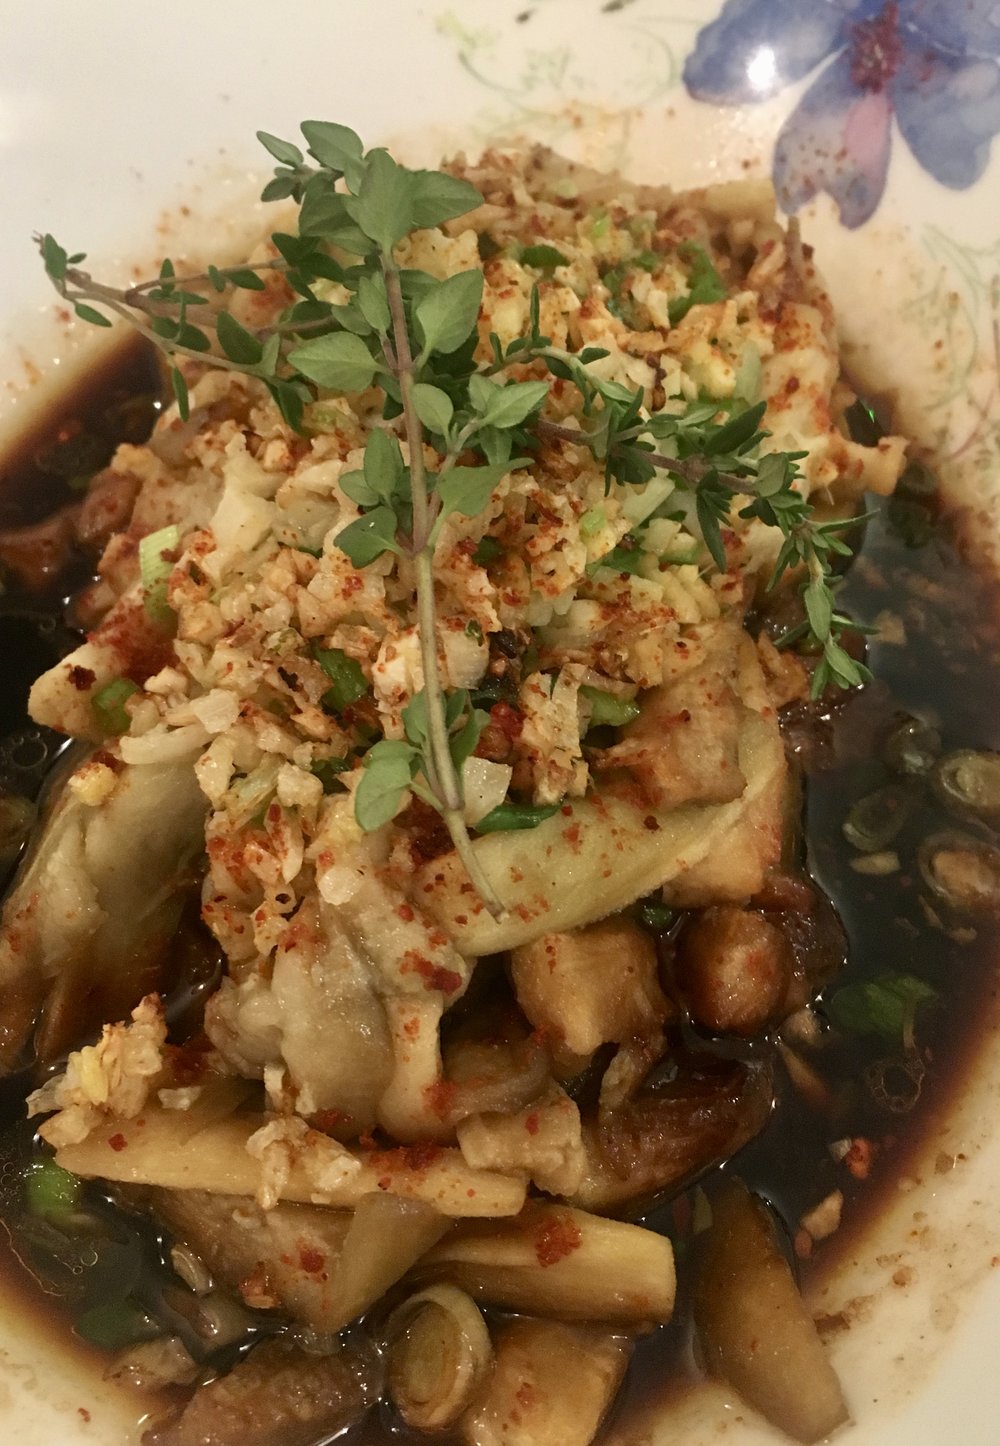 Cold steamed aubergine with a garlicky dressing